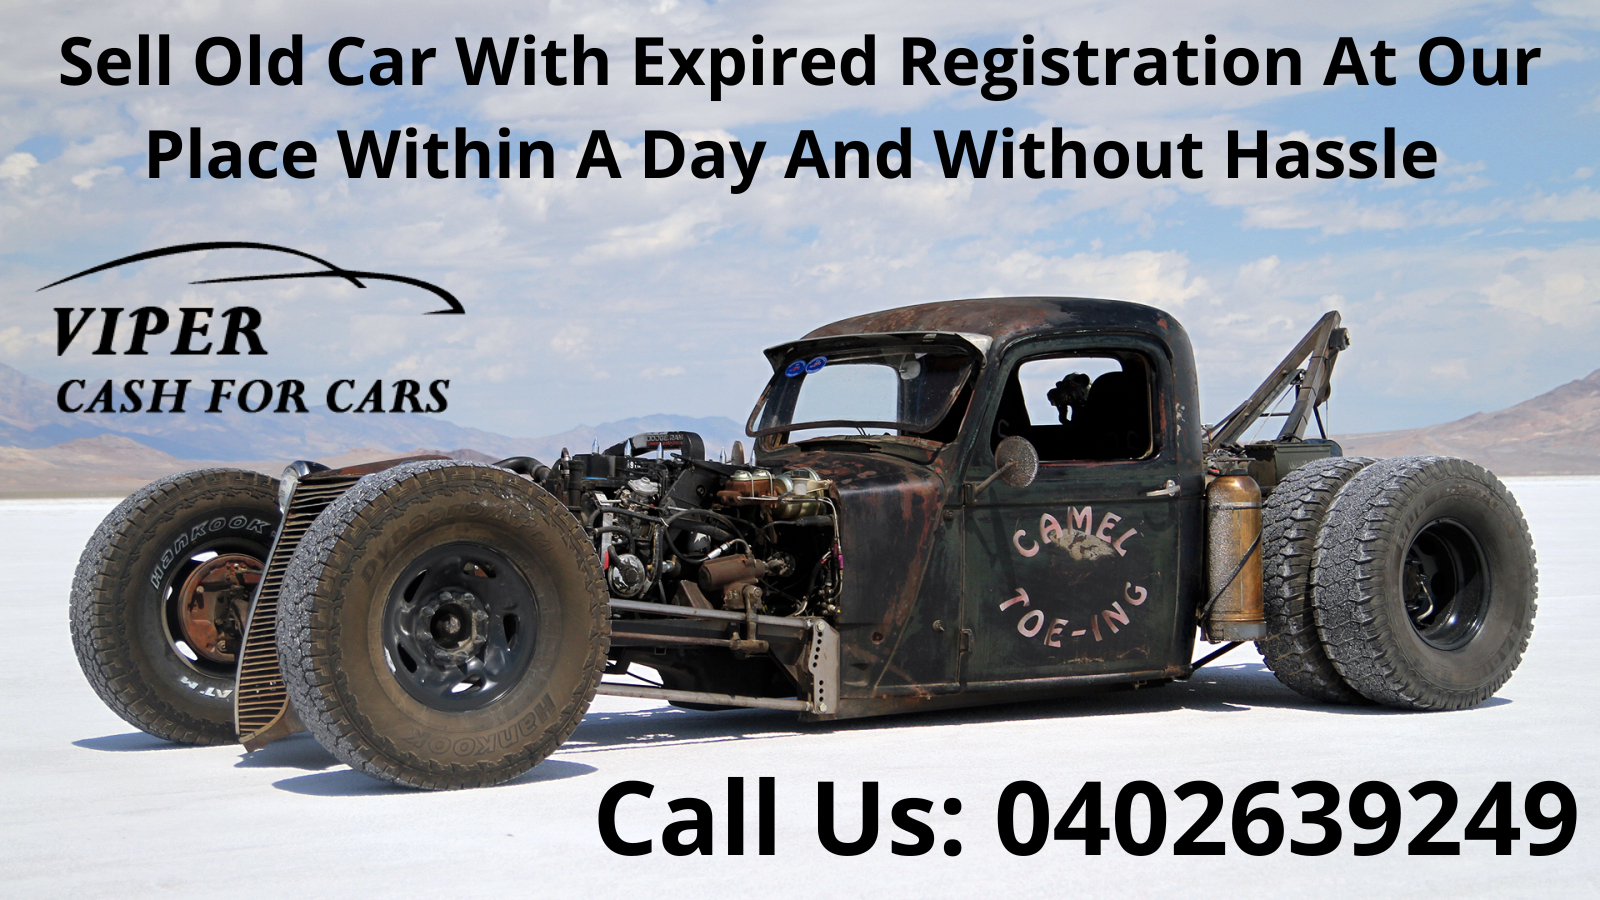 Sell Old Car With Expired Registration At Our Place Within A Day And Without Hassle